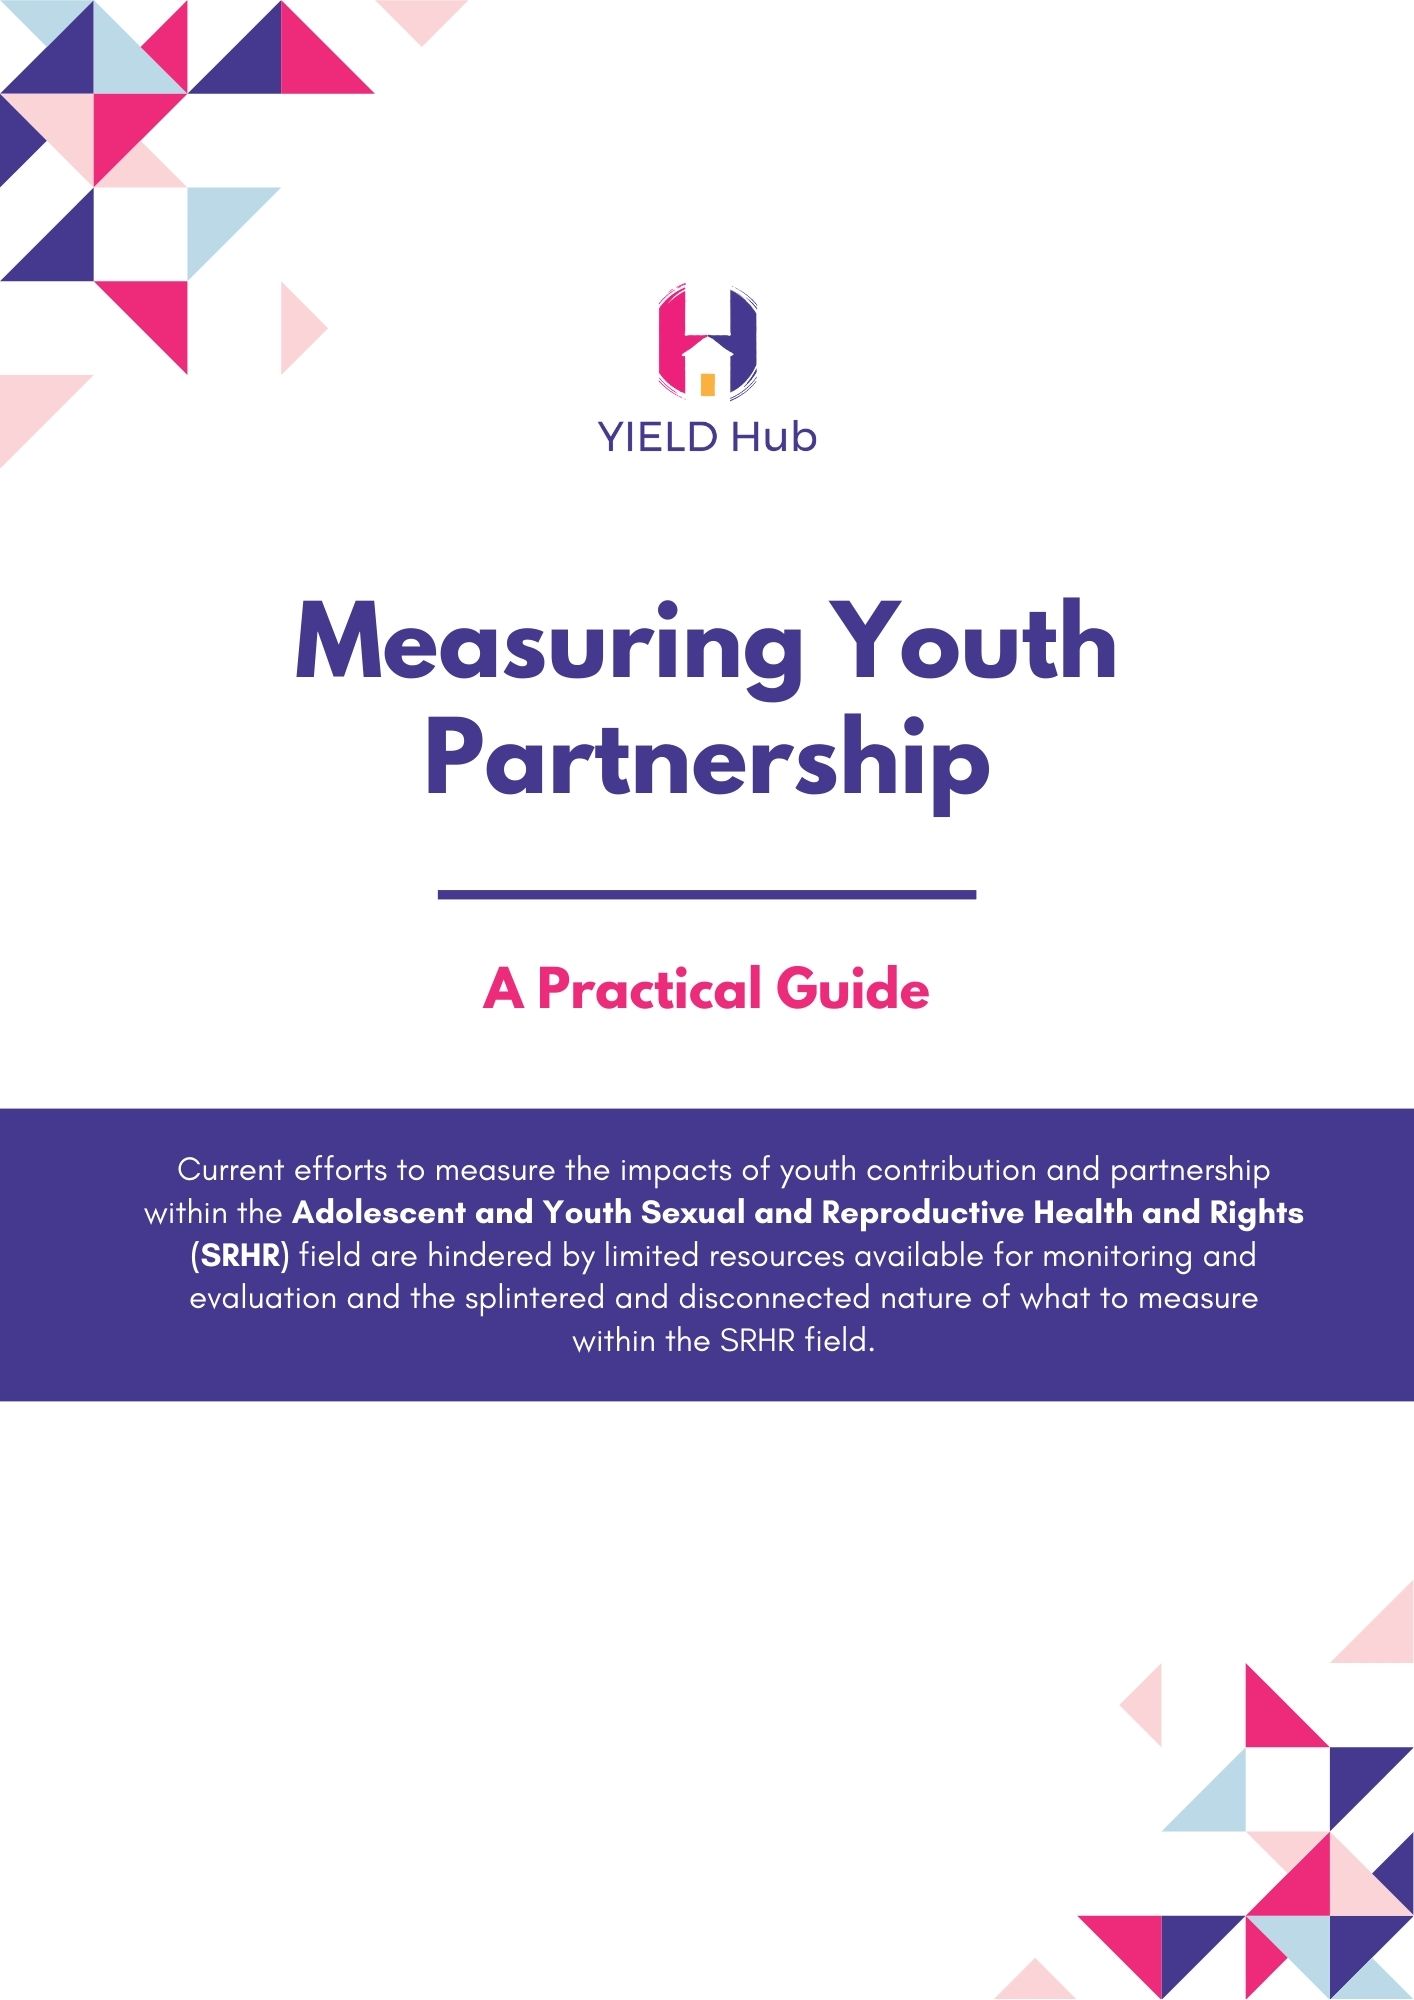 A Practical Guide to Measuring Youth Partnership